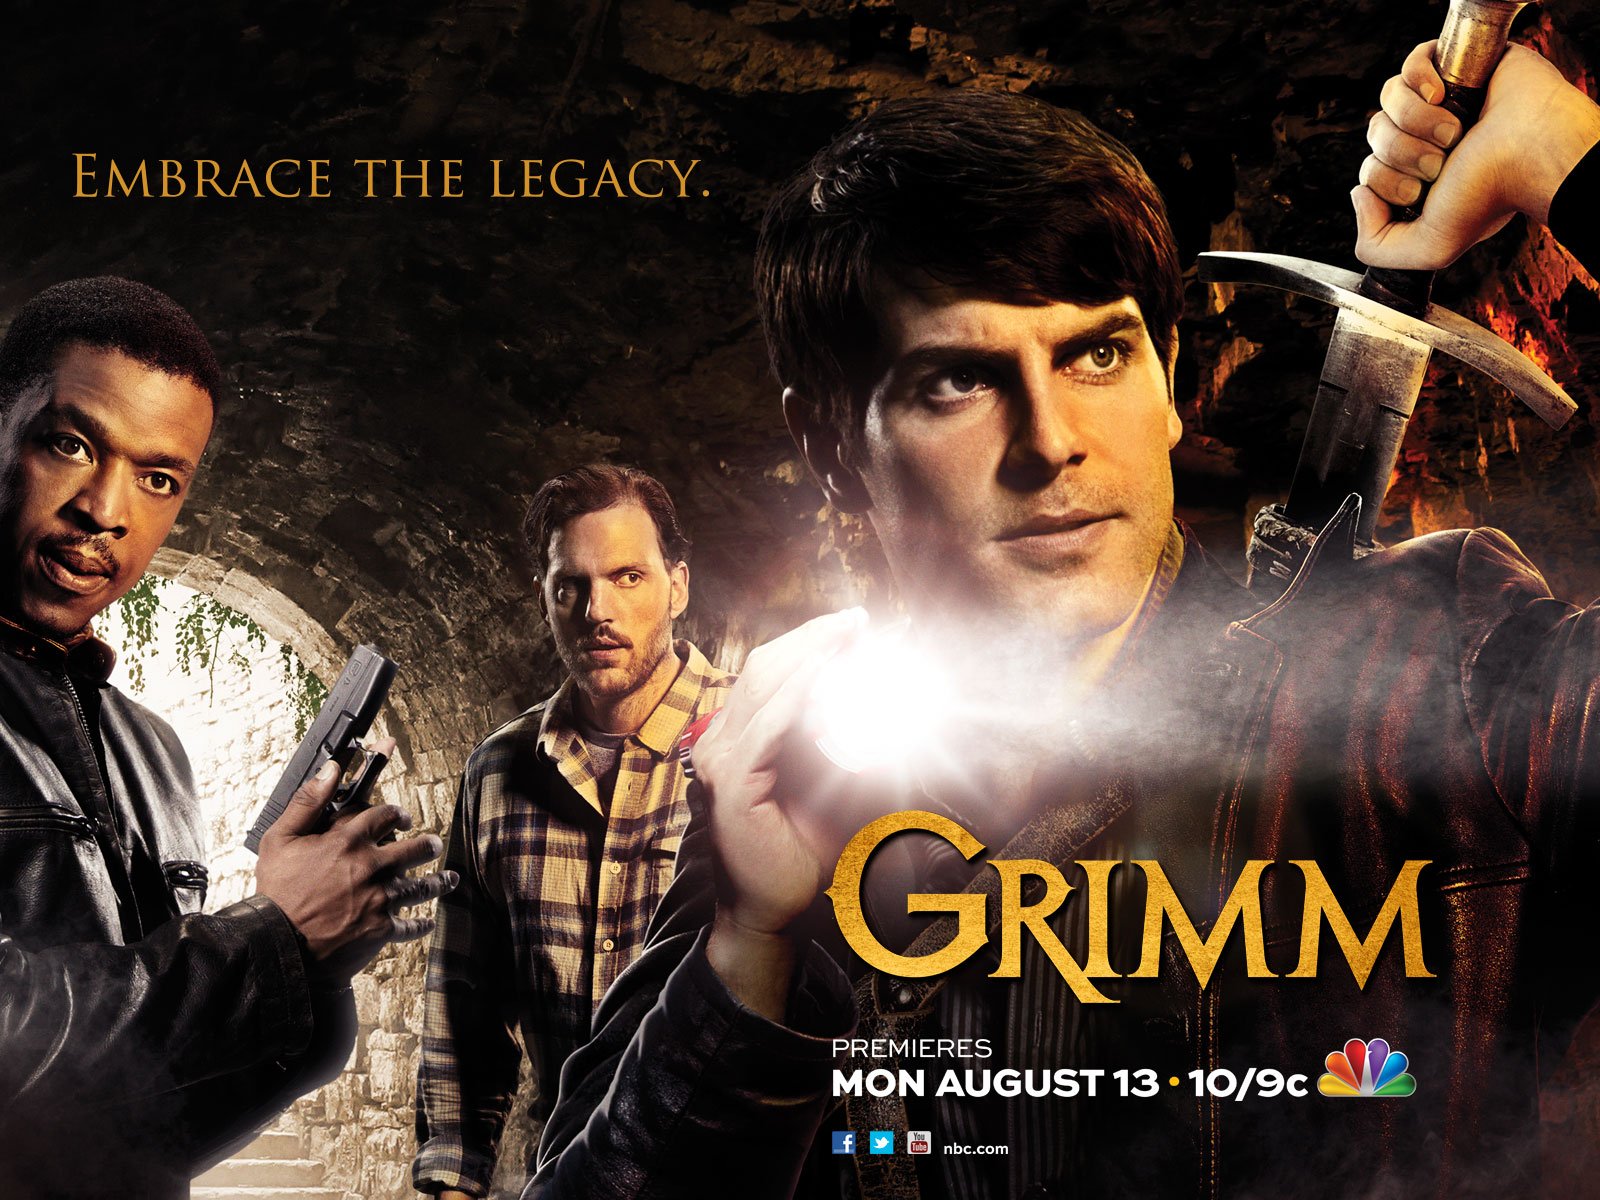 Grimm Image HD Wallpaper And Background Photos